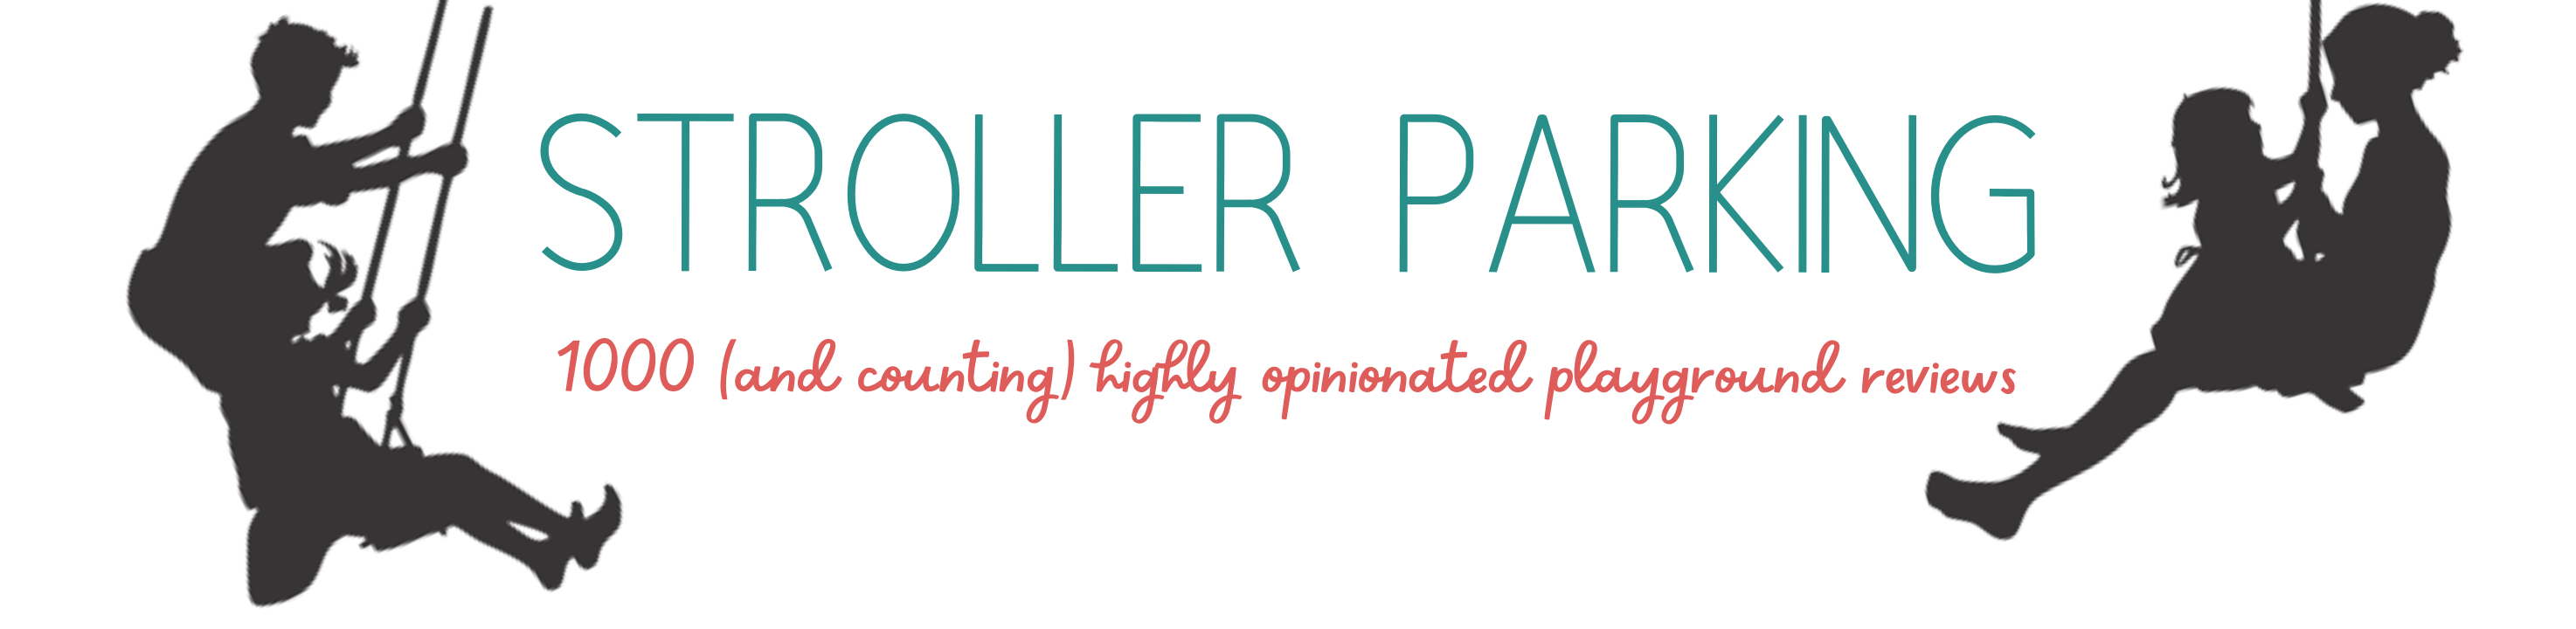 StrollerParking - (1000 and counting) highly opinionated playground reviews